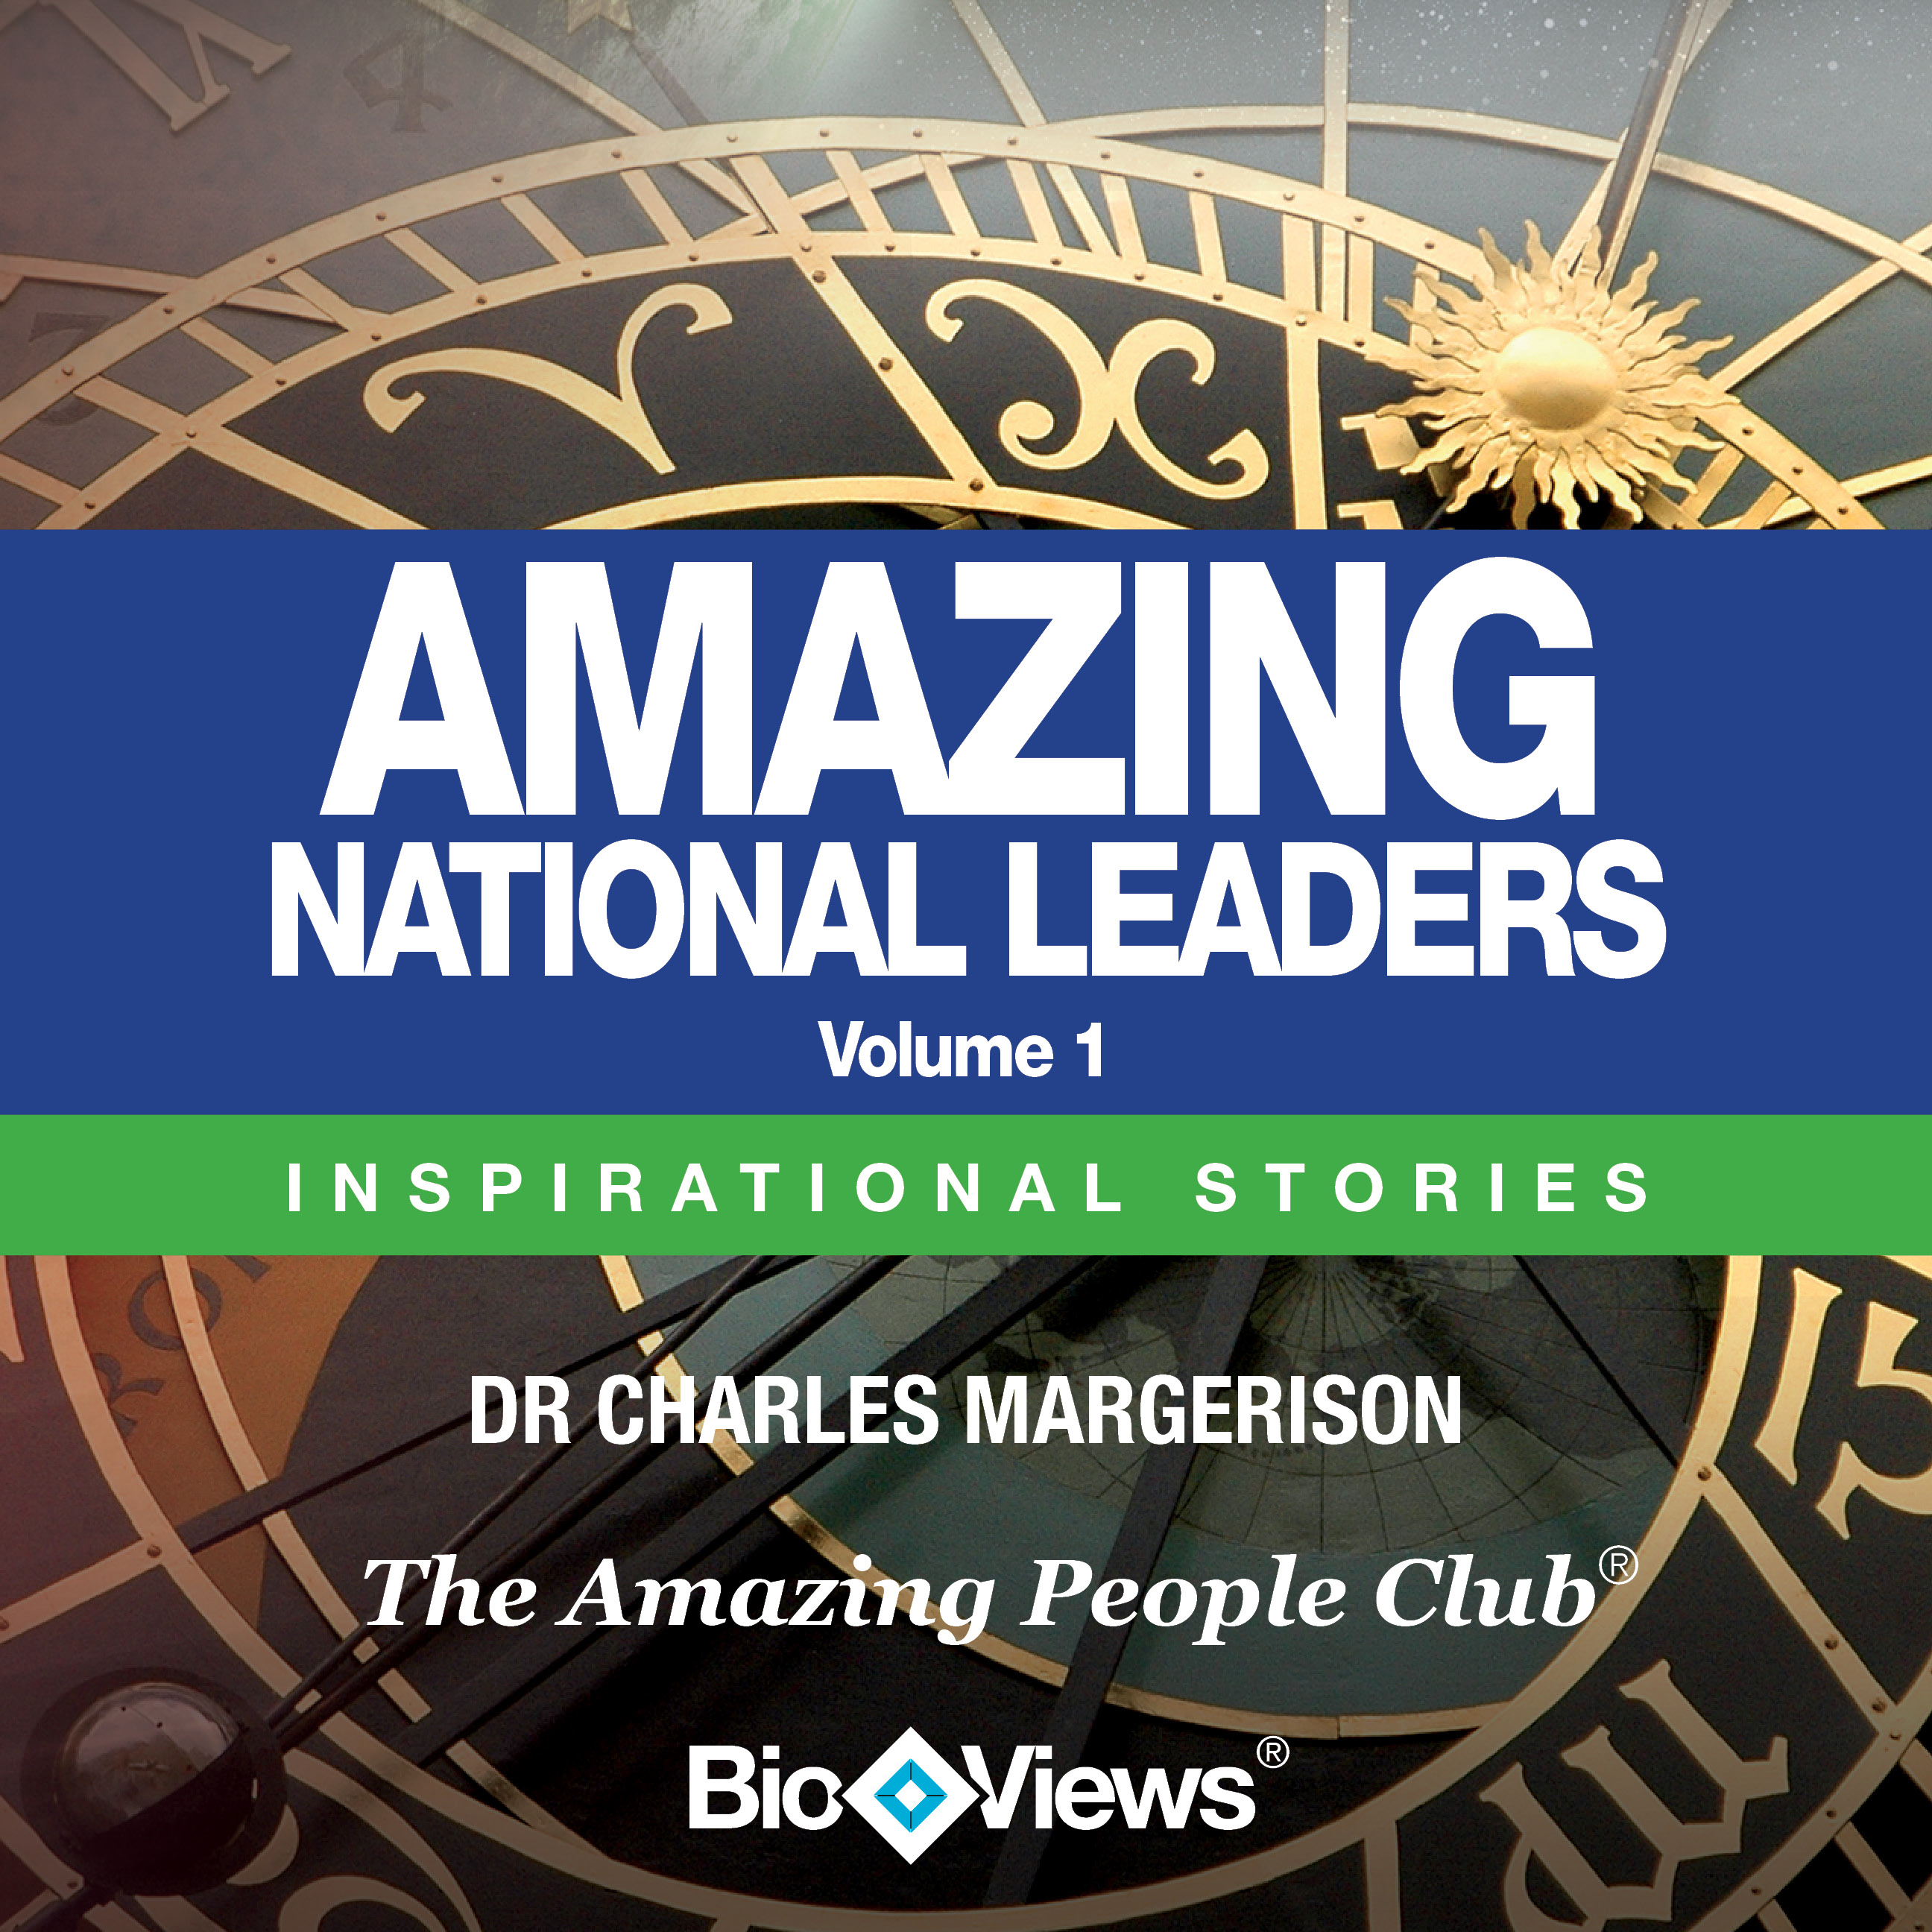 Amazing National Leaders, Vol. 1: Inspirational Stories Audiobook, by Charles Margerison